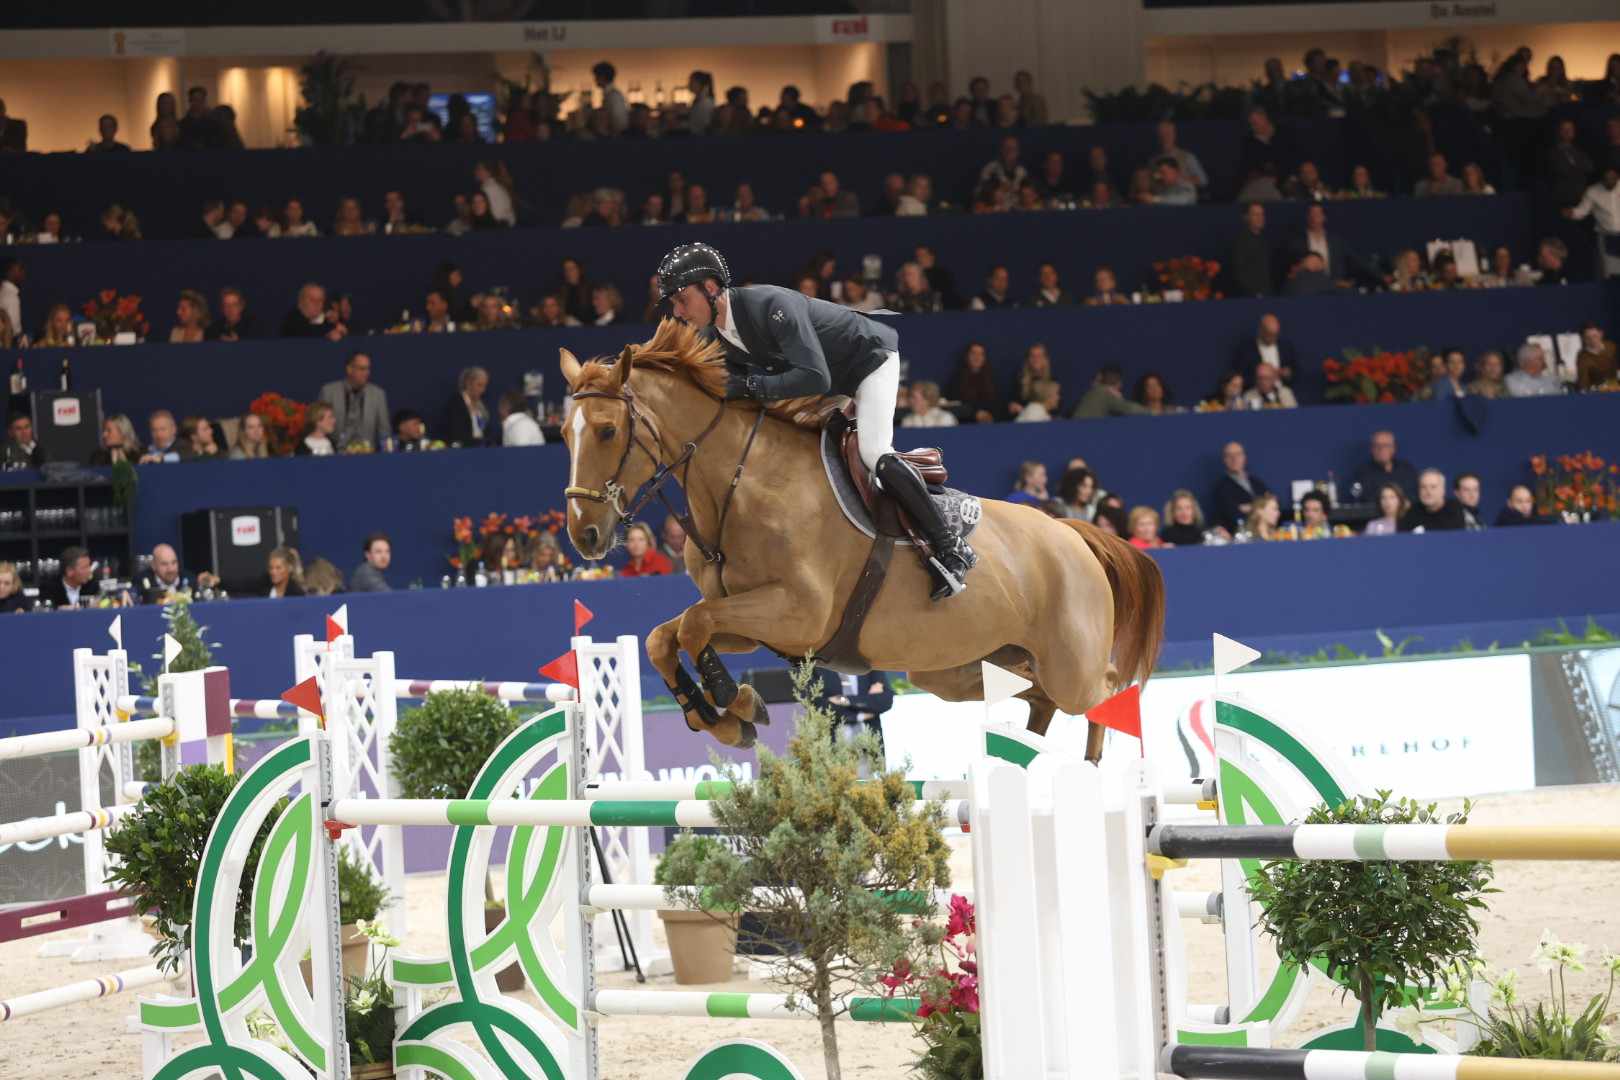 Winner of the Grand Prix Amsterdam, Julien Epaillard: "Winning the World Cup and Grand Prix consecutively can only be done with two super horses."